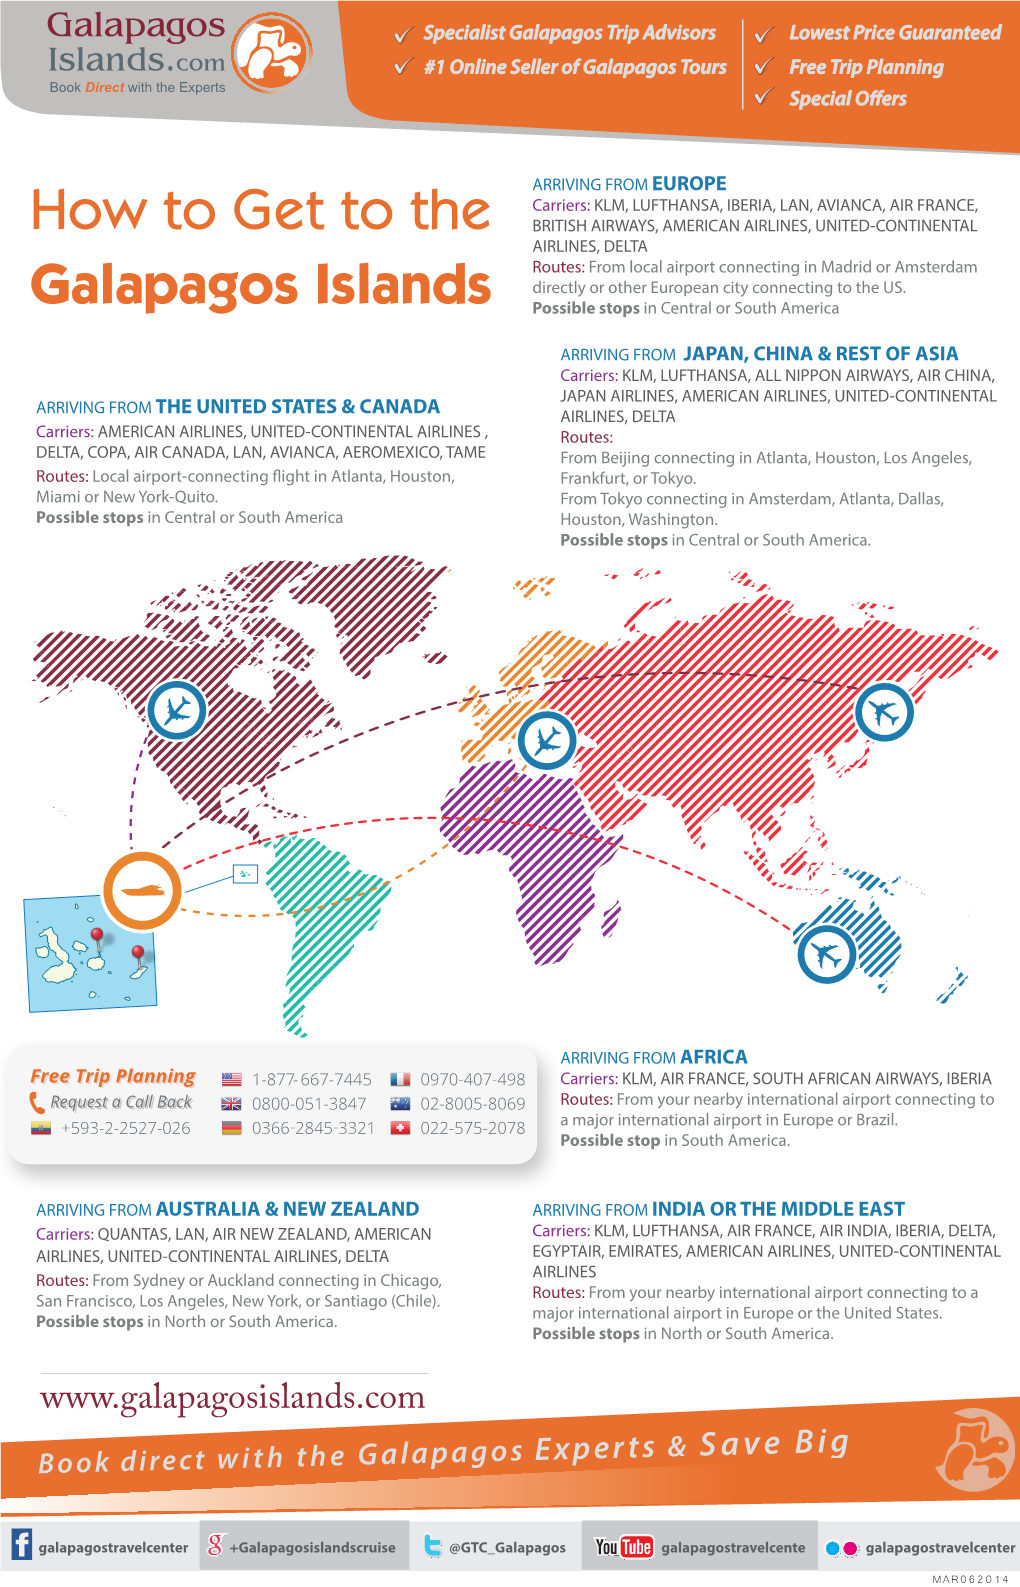 How to Get to the Galapagos Islands